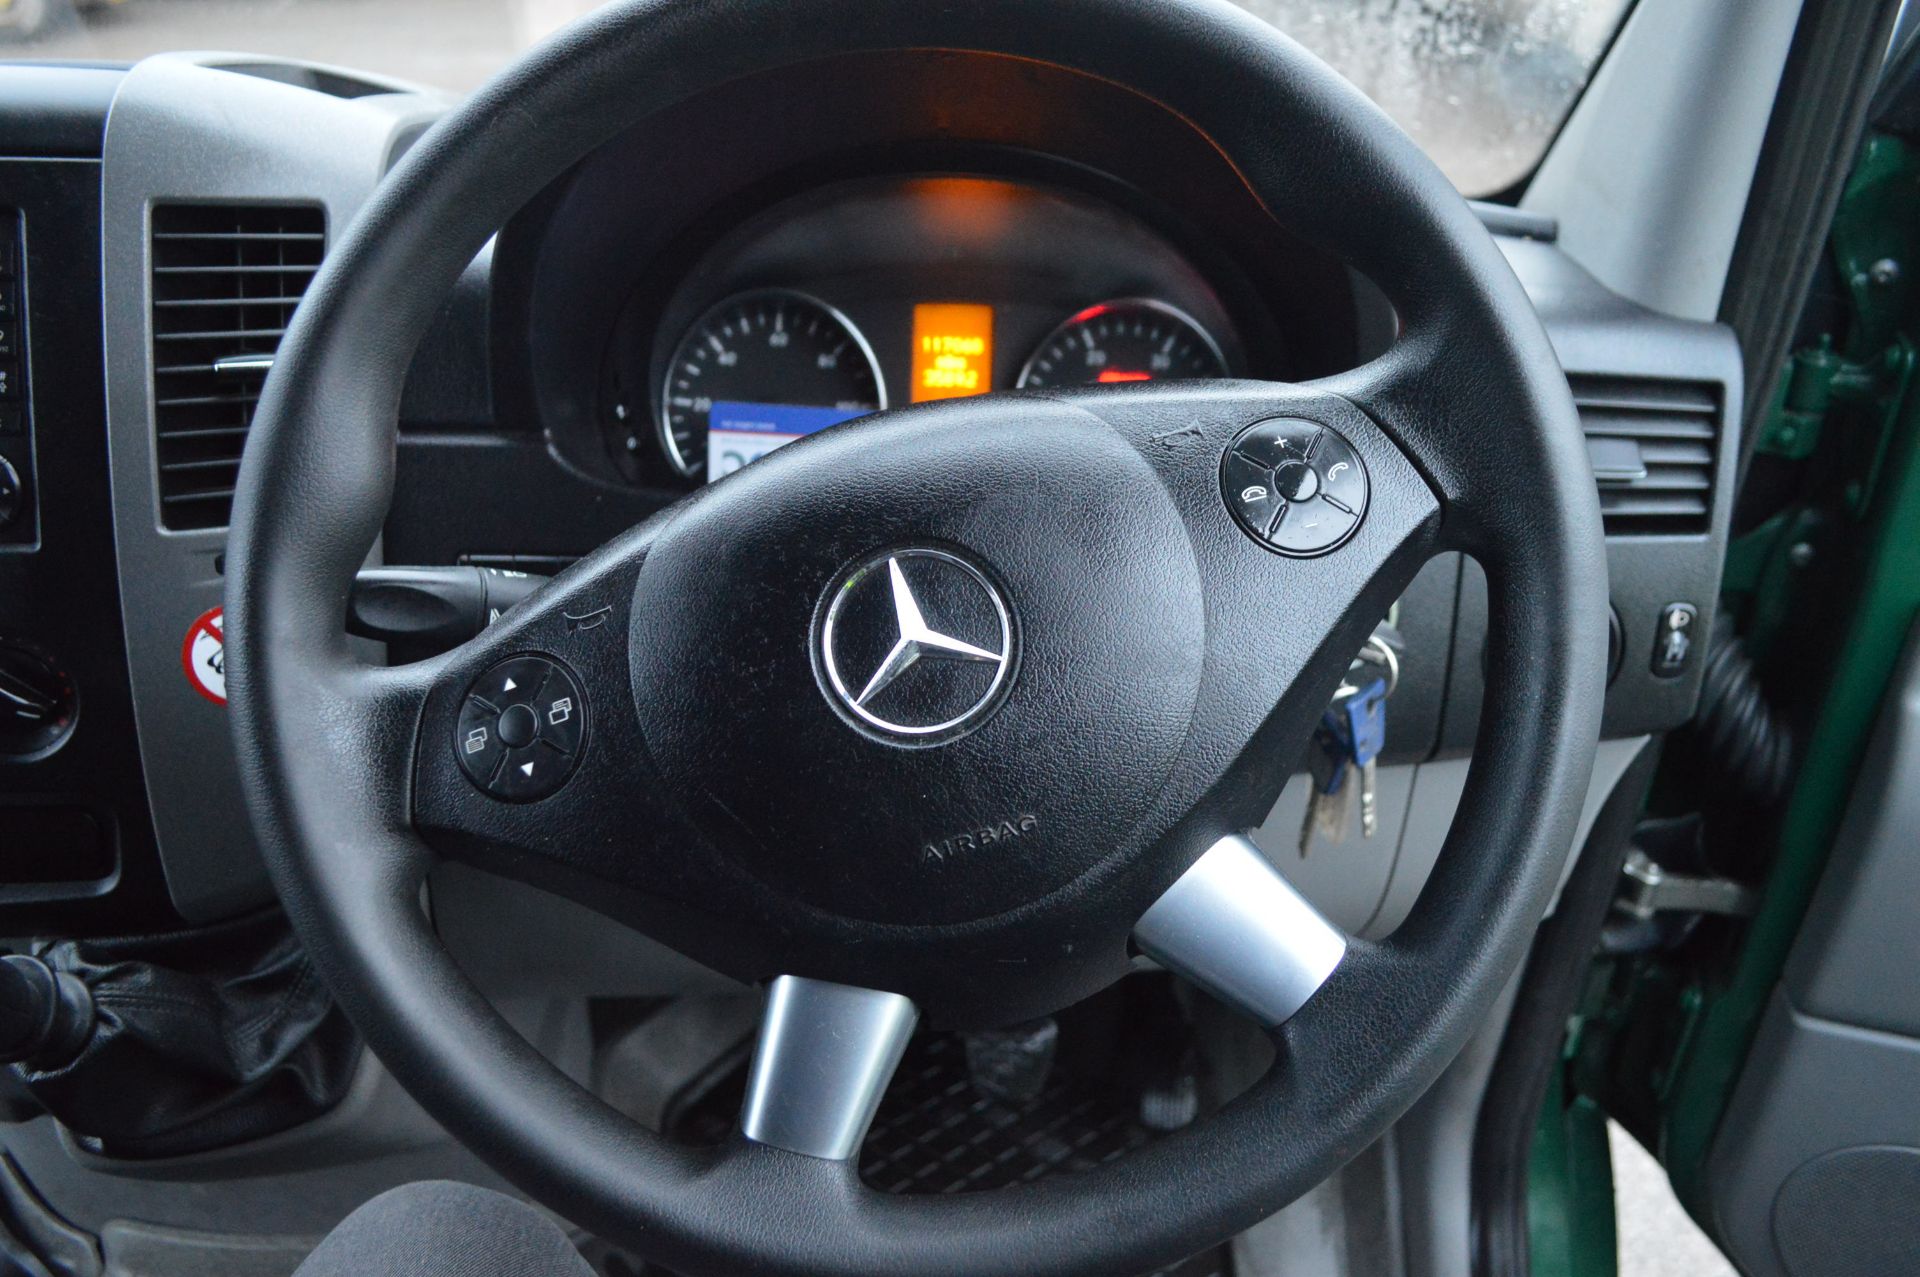 2014/64 REG MERCEDES-BENZ SPRINTER 313 CDI, 1 OWNER FROM NEW *NO VAT* - Image 19 of 25